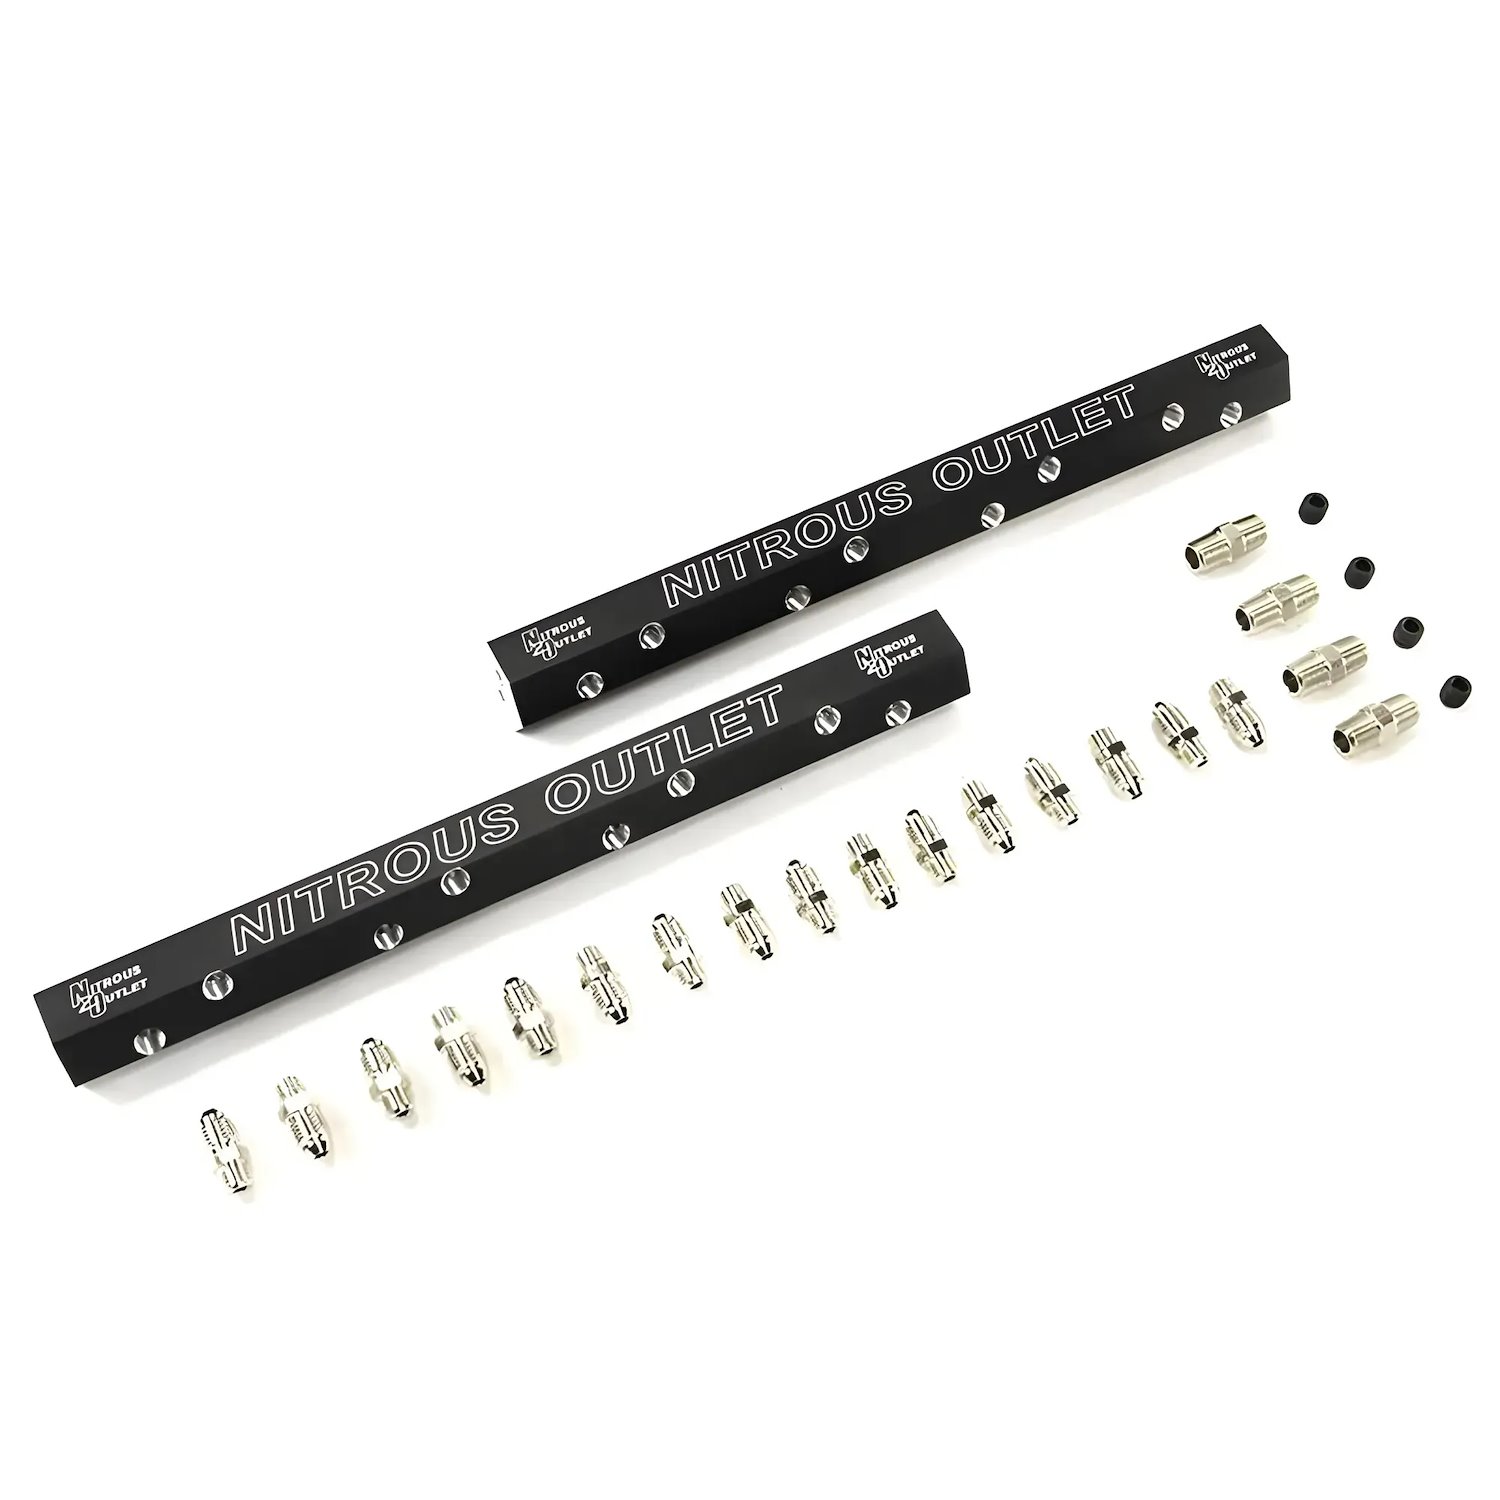 00-01765-D-Corvette Dual Passage Dual Injection Rail Kit w/Fittings, 1997-UP Corvette, 1/8 in. NPT Inlets, 5/16-24 in. Outlets